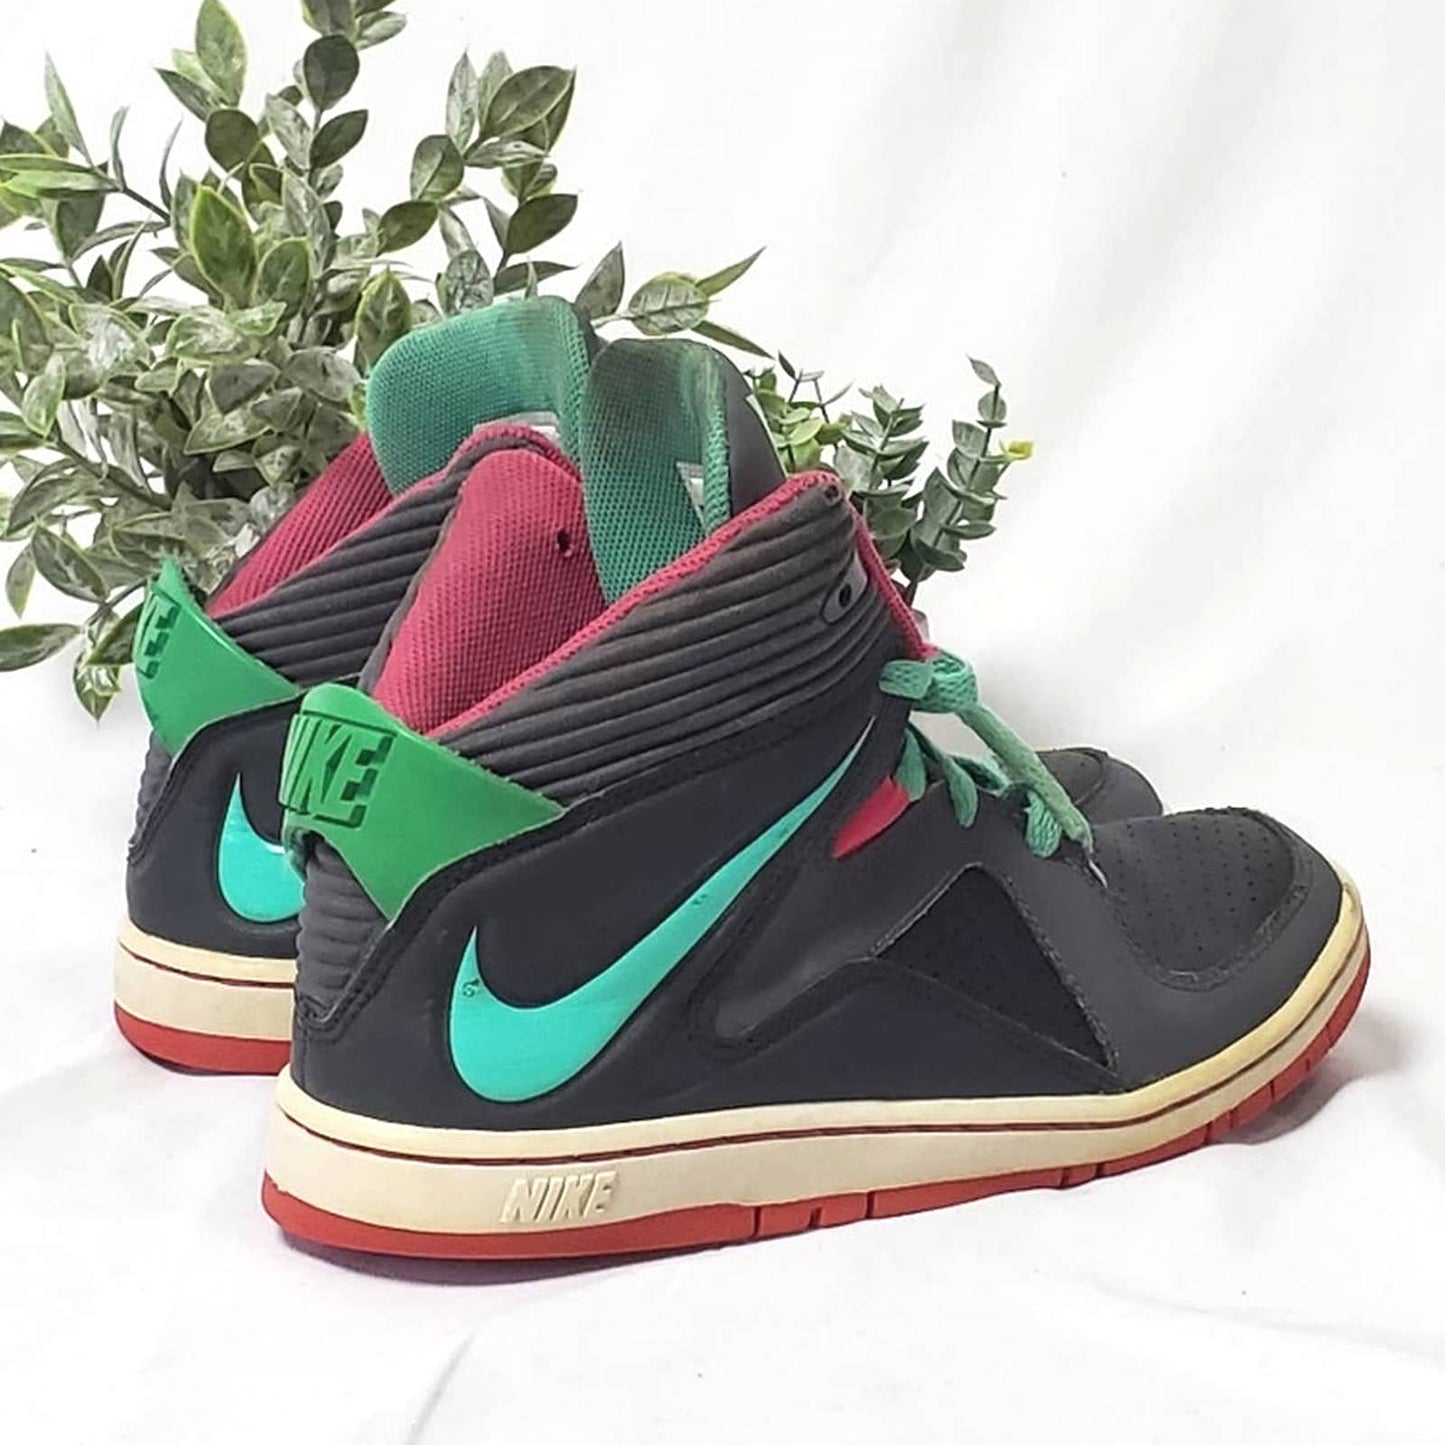 Nike ‘Court Invader’ High Top Basketball Sneakers - 5Y